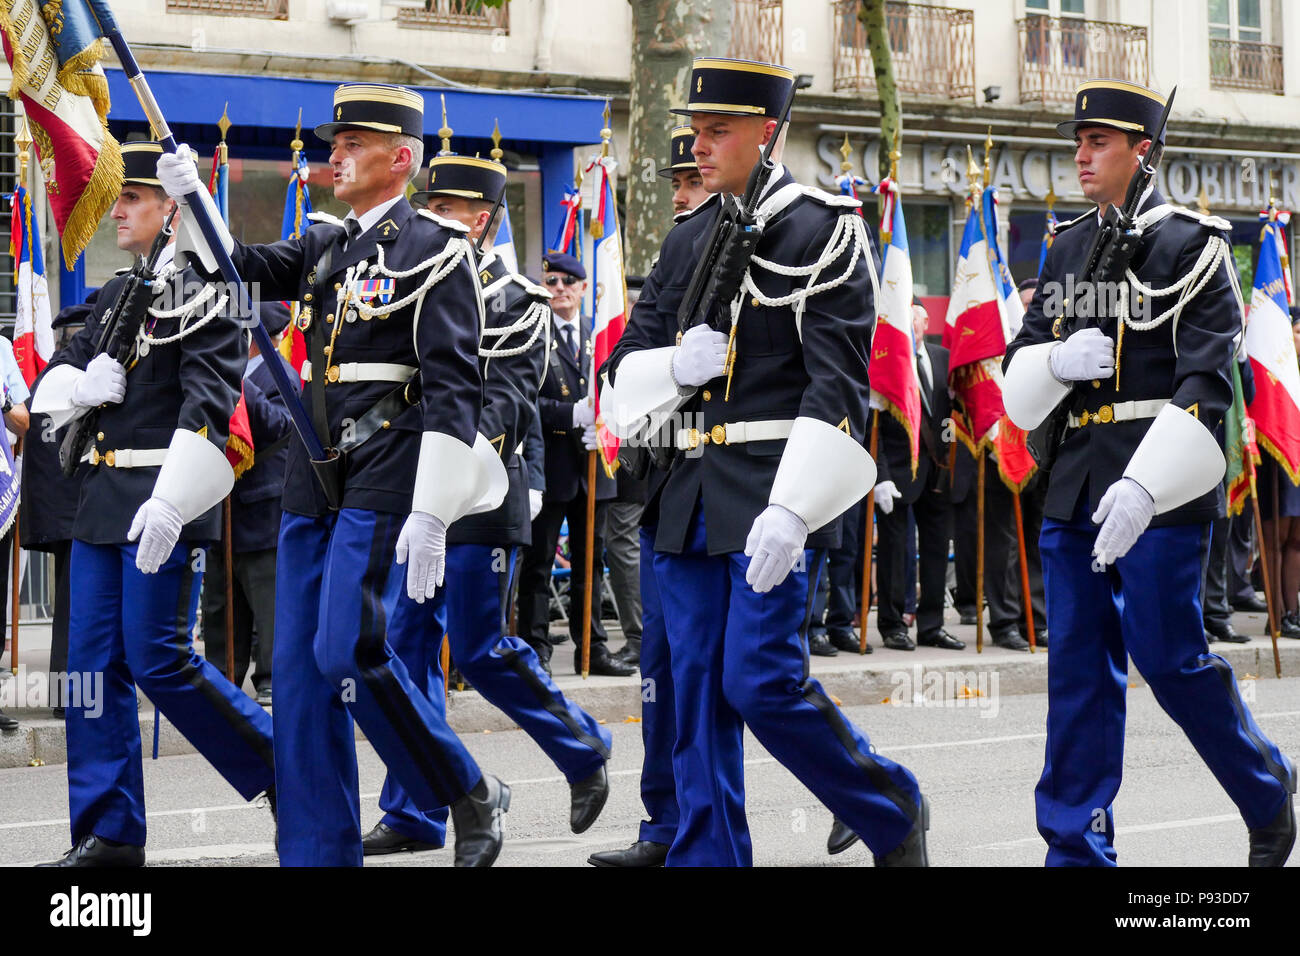 Troops march in Lyon on the occasion off French National Day, Lyon ...